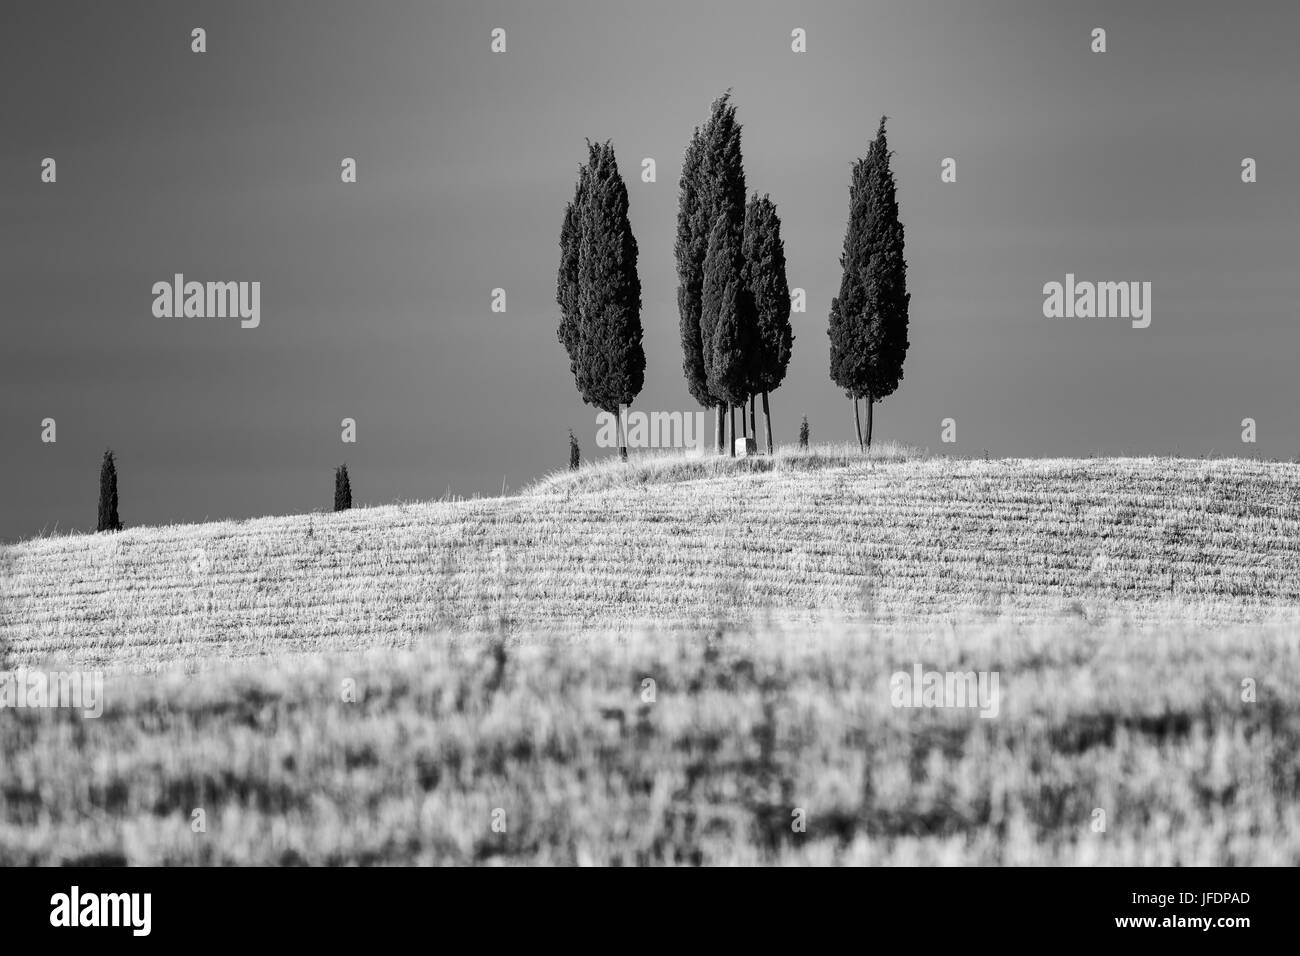 Cypresses in the tuscany Stock Photo